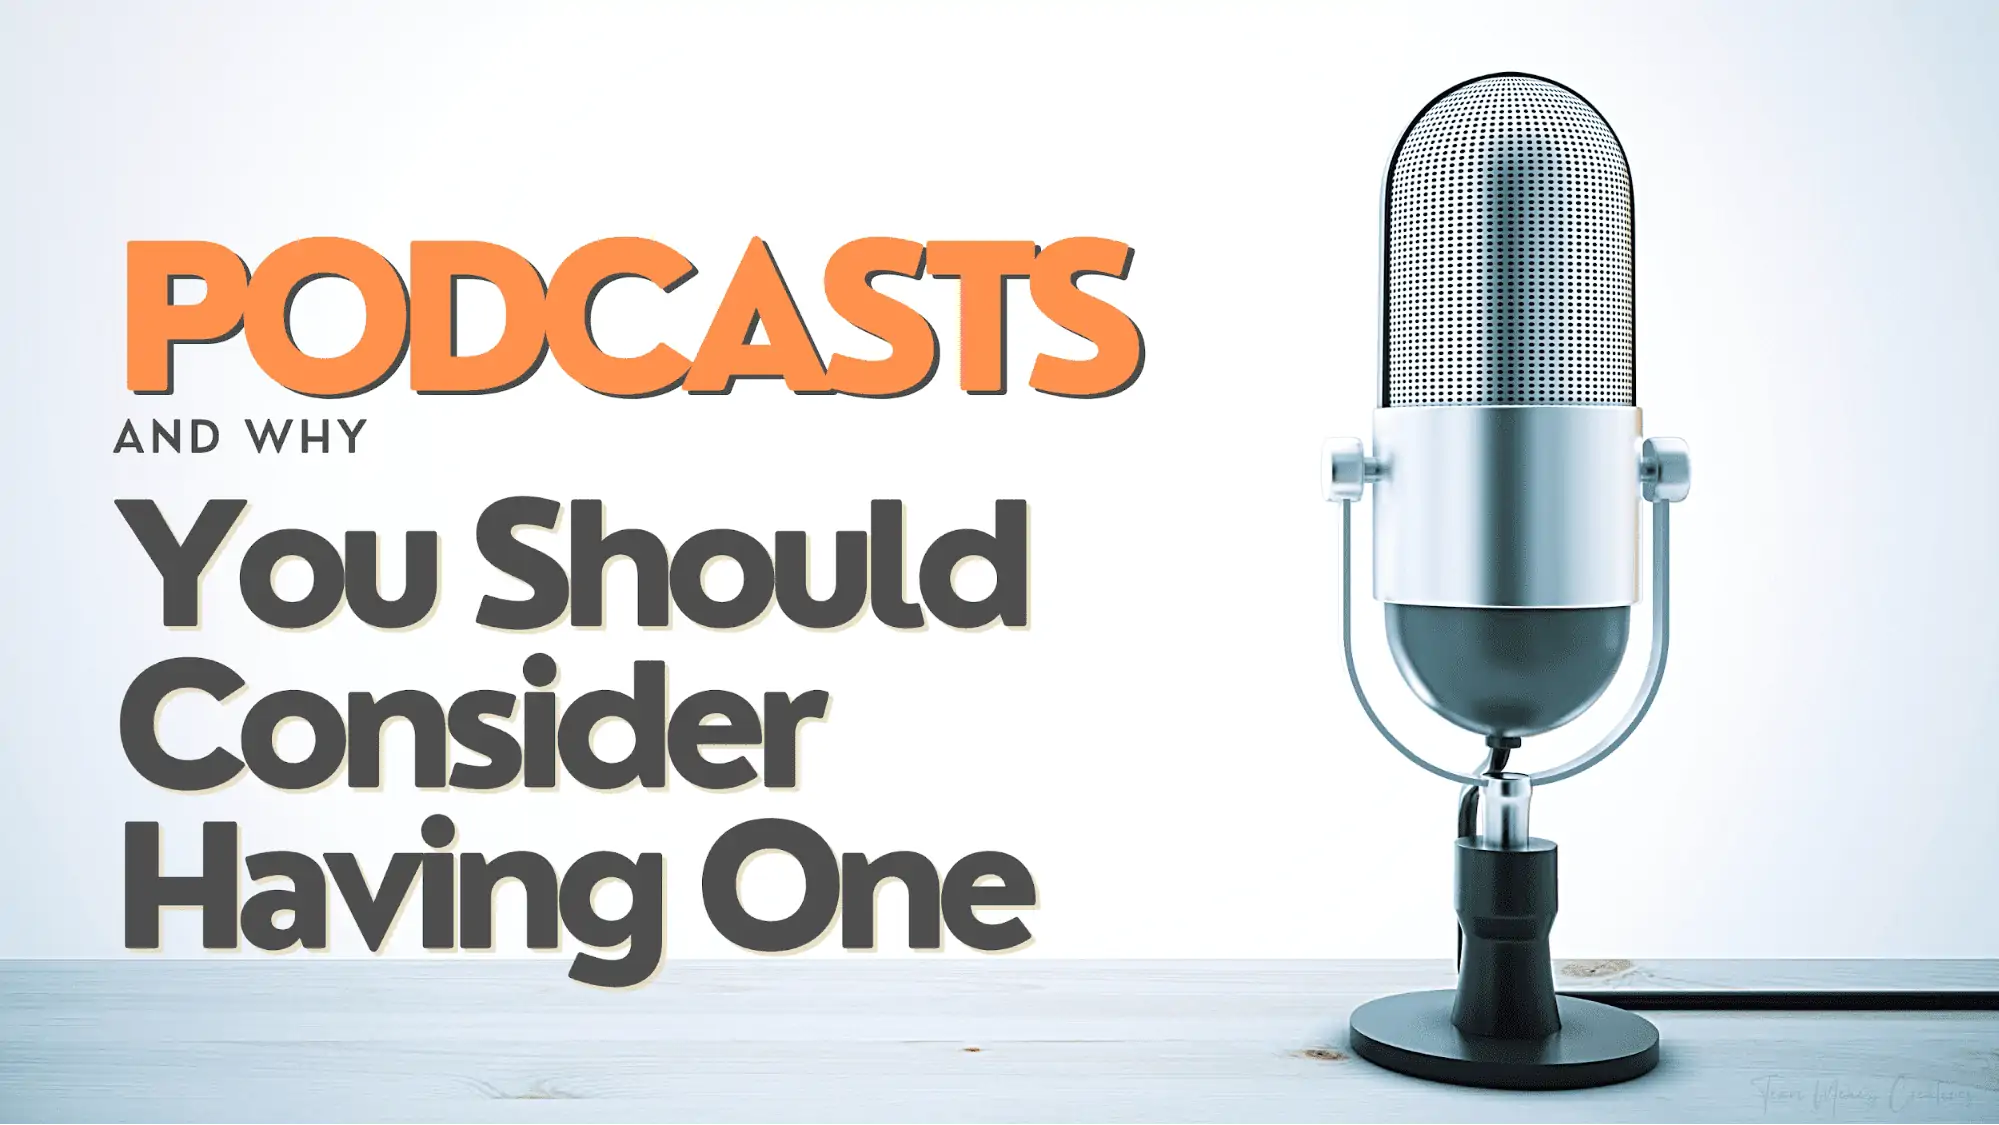 Podcast Marketing and why you should start one